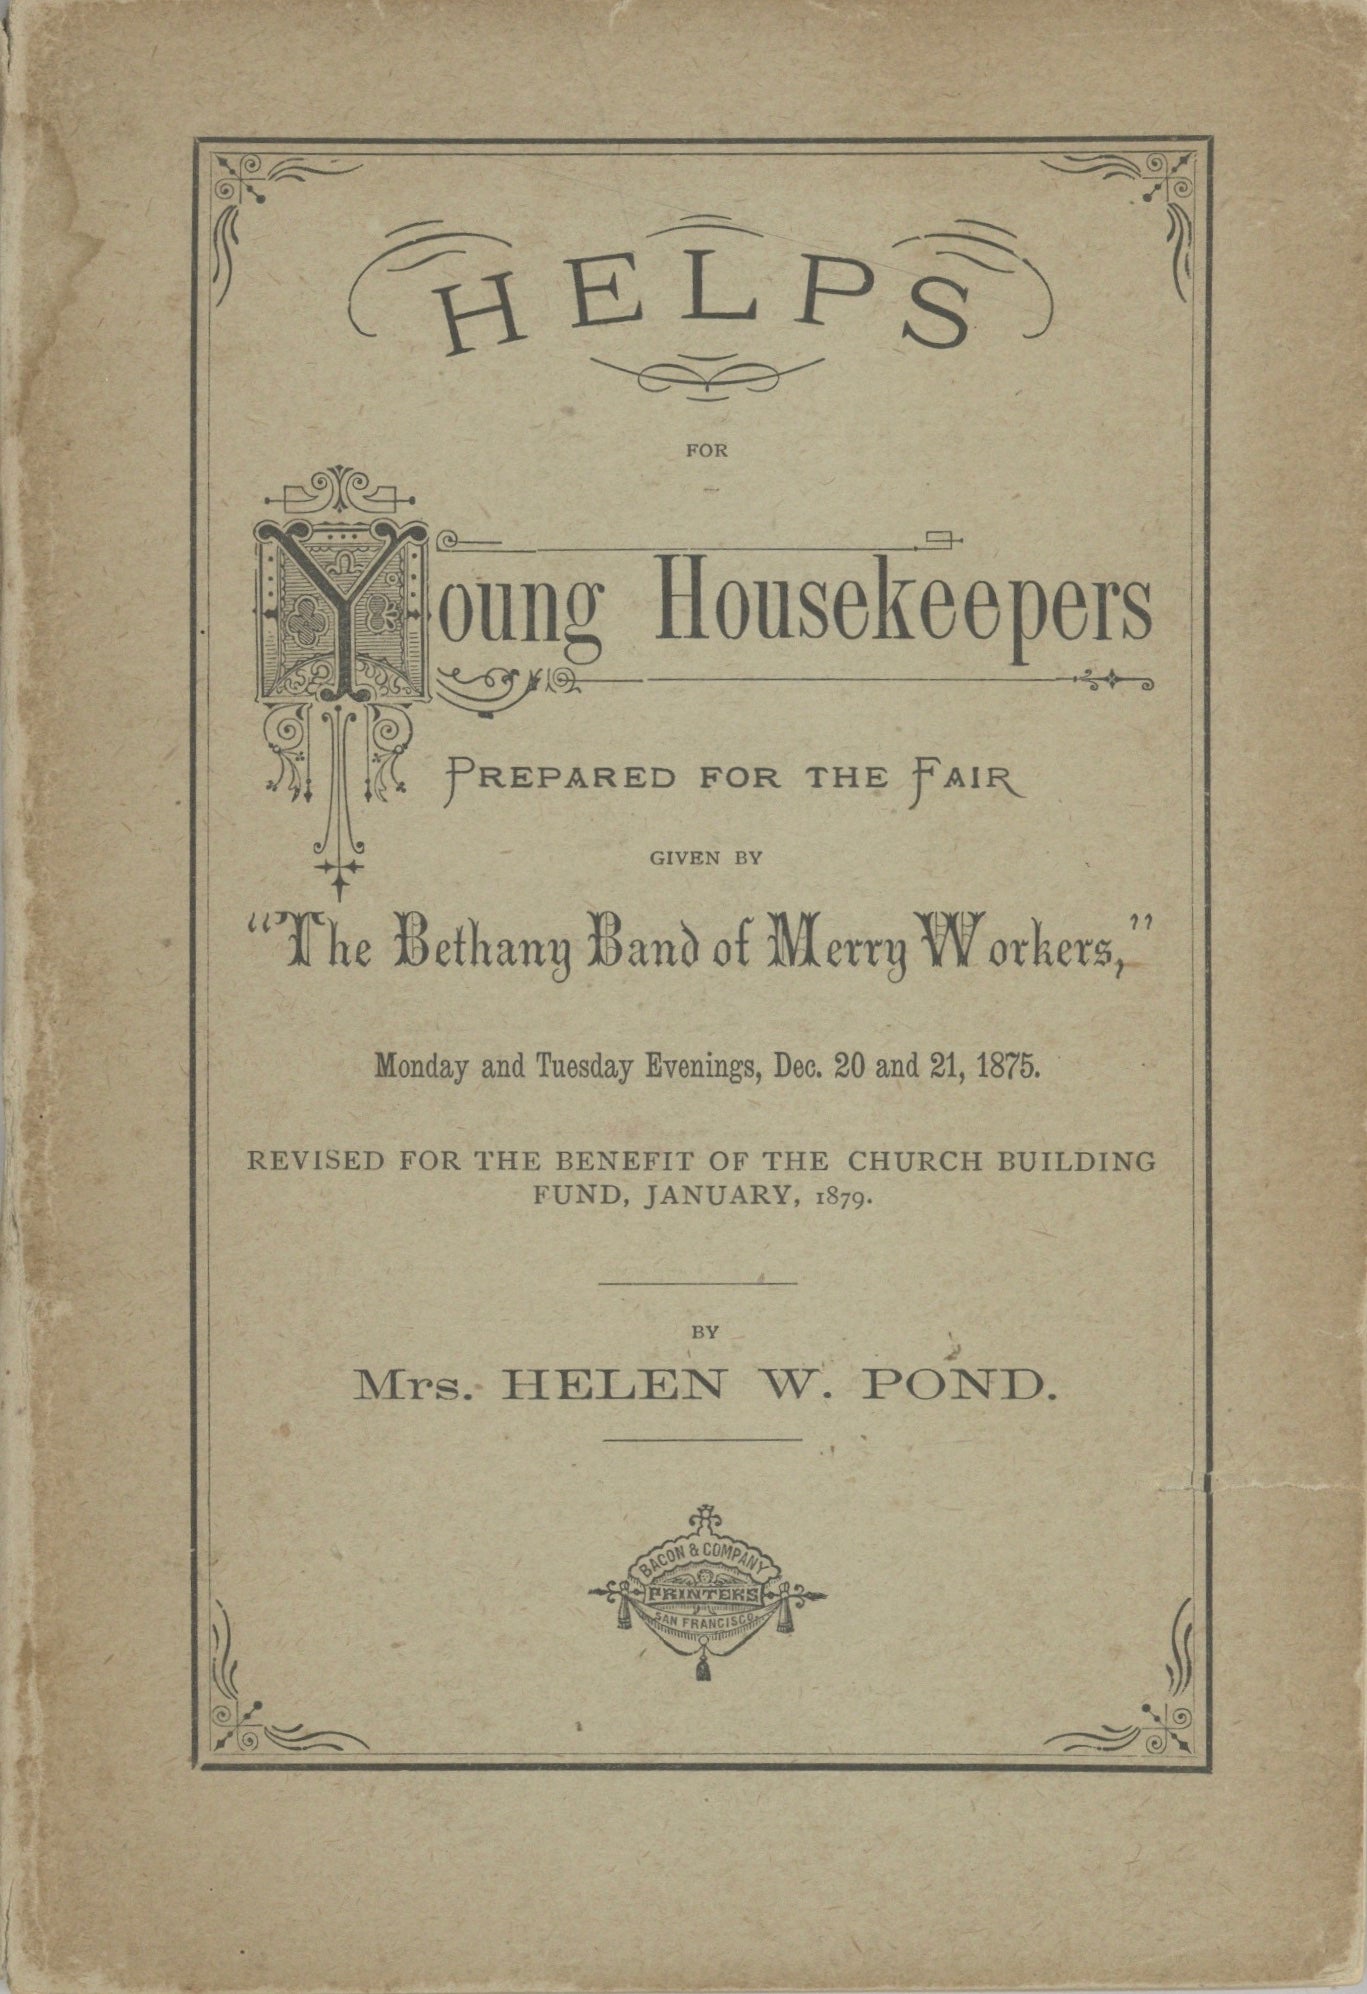 Item #3983 Helps for Young Housekeepers. Prepared for the Fair Given by “The Bethany Band of Merry Workers,” Monday and Tuesday evenings, Dec. 20 and 21, 1875, [and] Revised for the Benefit of the Church Building Fund, January 1879 by Mrs. Helen W. Pond. Helen Woodhull Pond, Bethany Congregational Church, Merry Workers, Calif San Francisco.